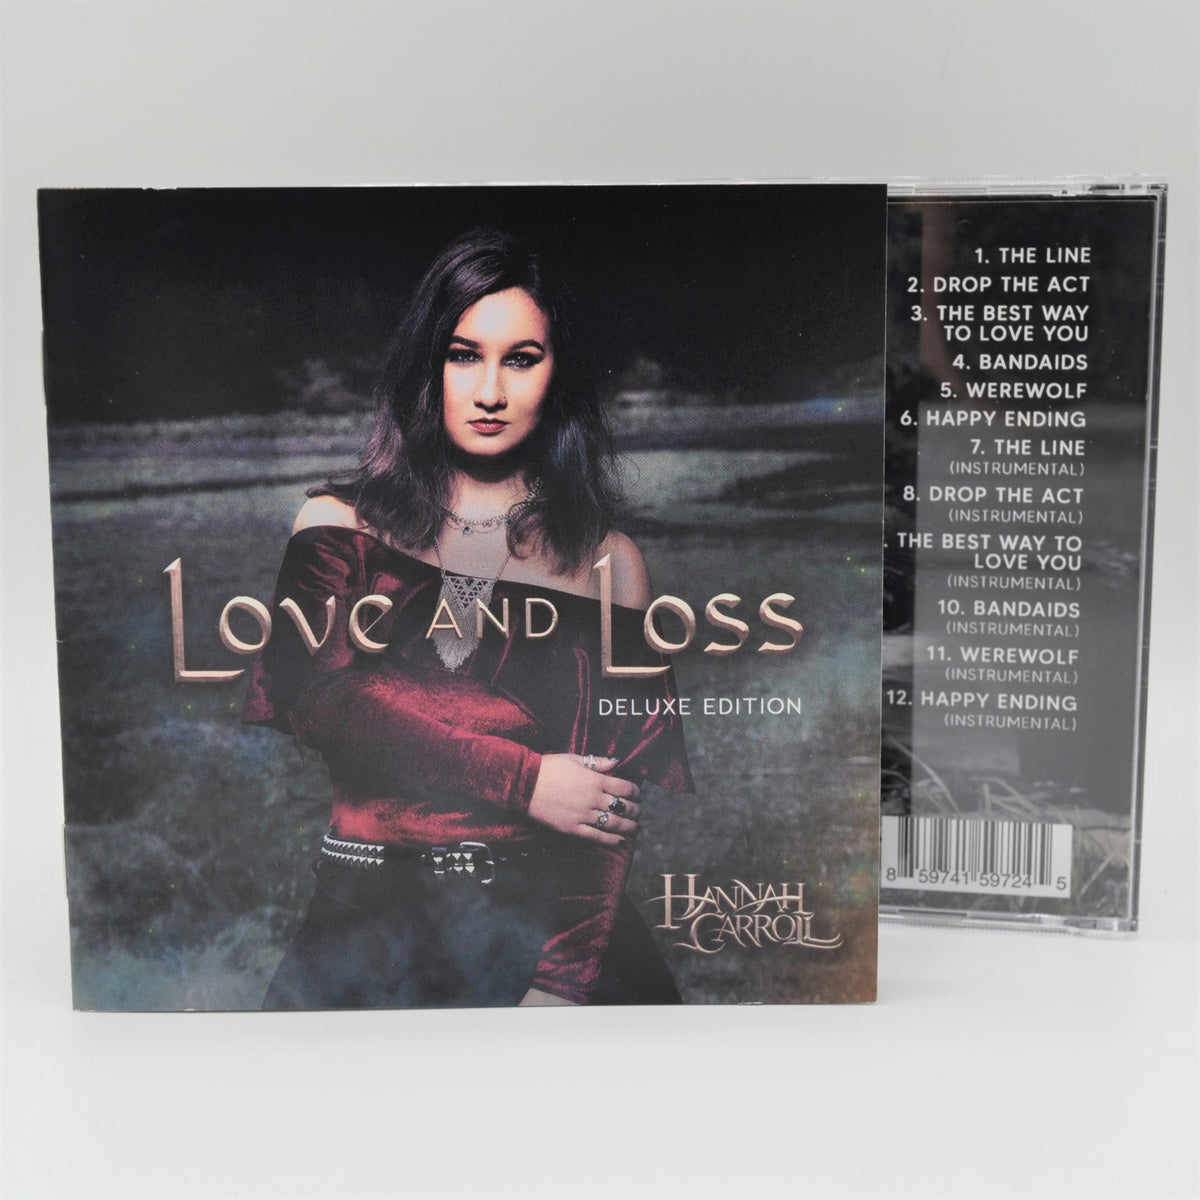 Love and Loss CD cover showing Hannah Carroll standing in green grass. CD back partially appears behind CD front, revealing 12-track song list.